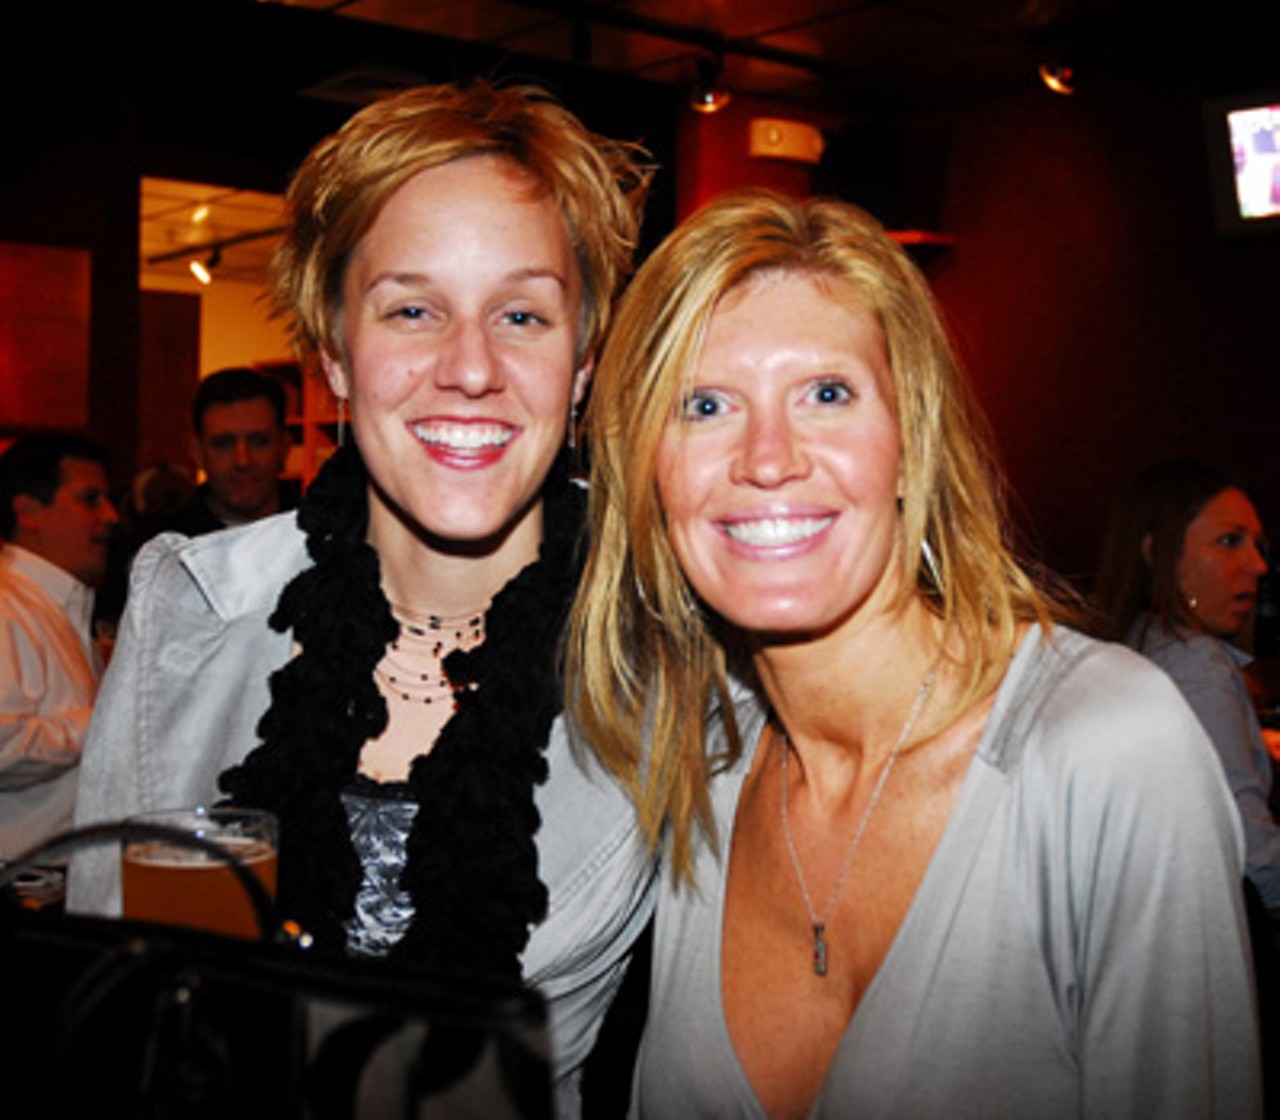 Mary Beth Hascall and Alicia Robinson were enjoying the beer and the music on January 2 at the Schafly Tap Room.